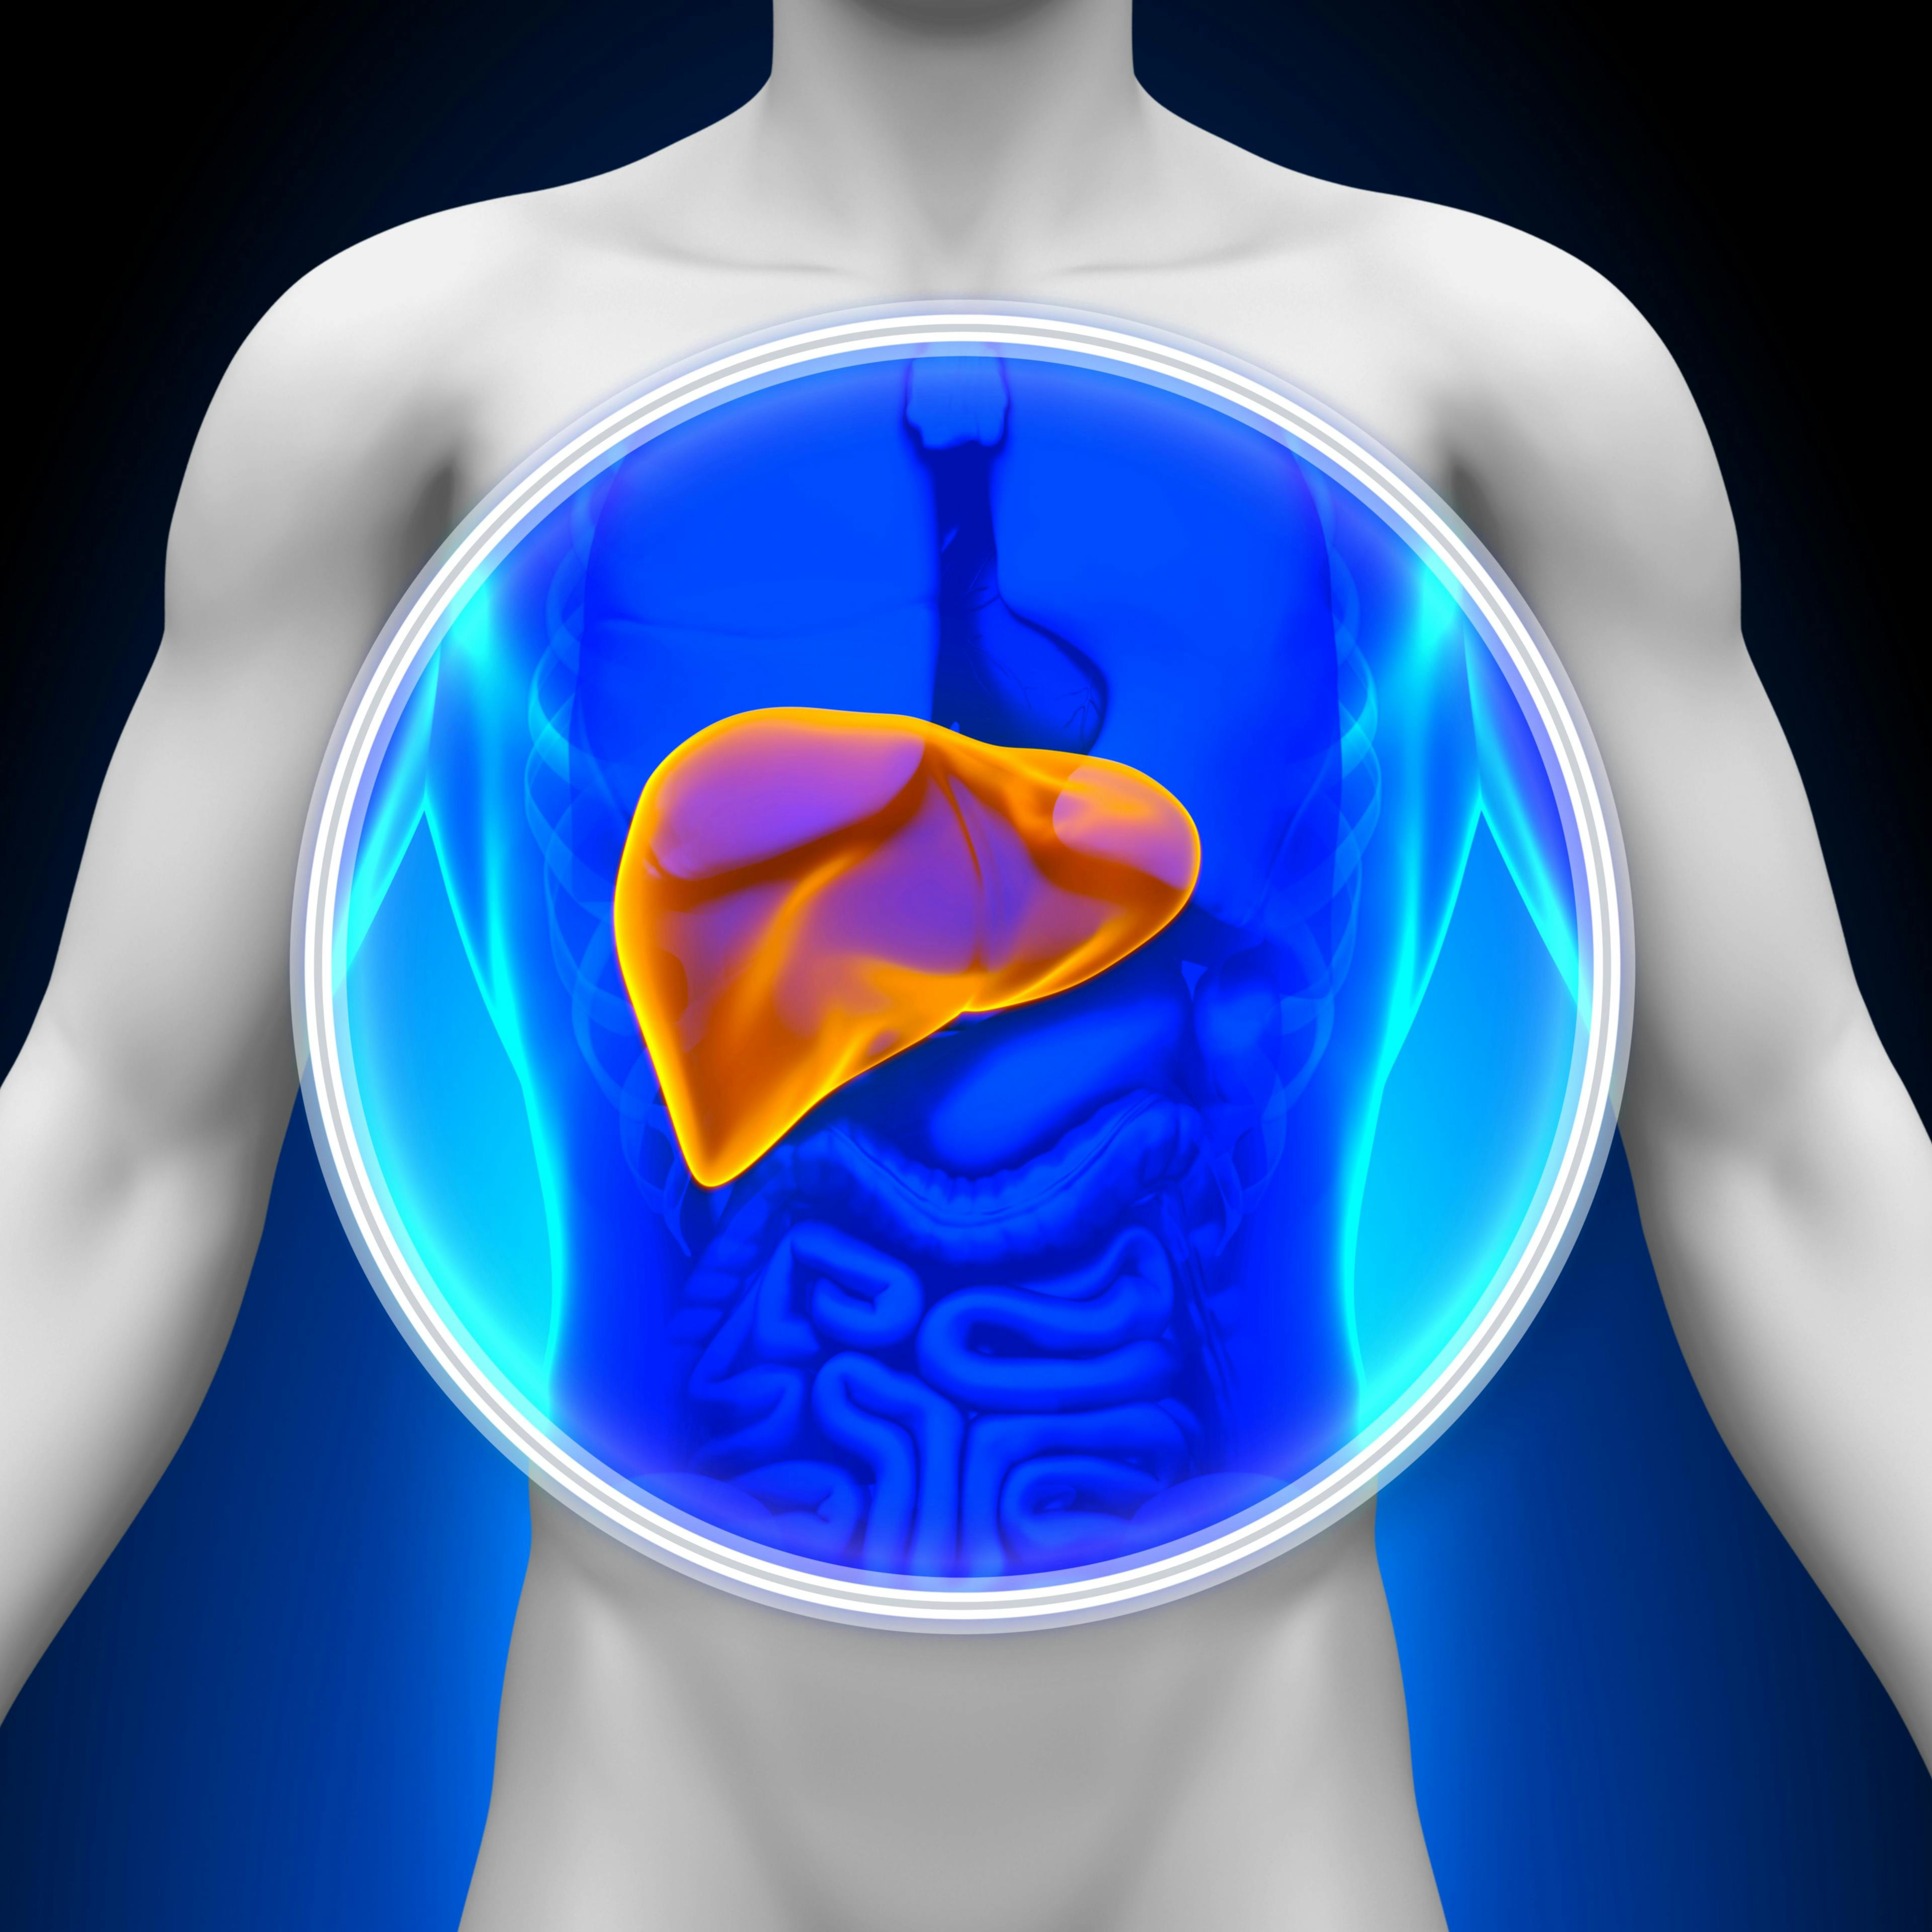 "More research is needed in patients with non-operable primary liver cancer and poor liver function to identify specific patients who could benefit from regorafenib treatment," according to the study authors.